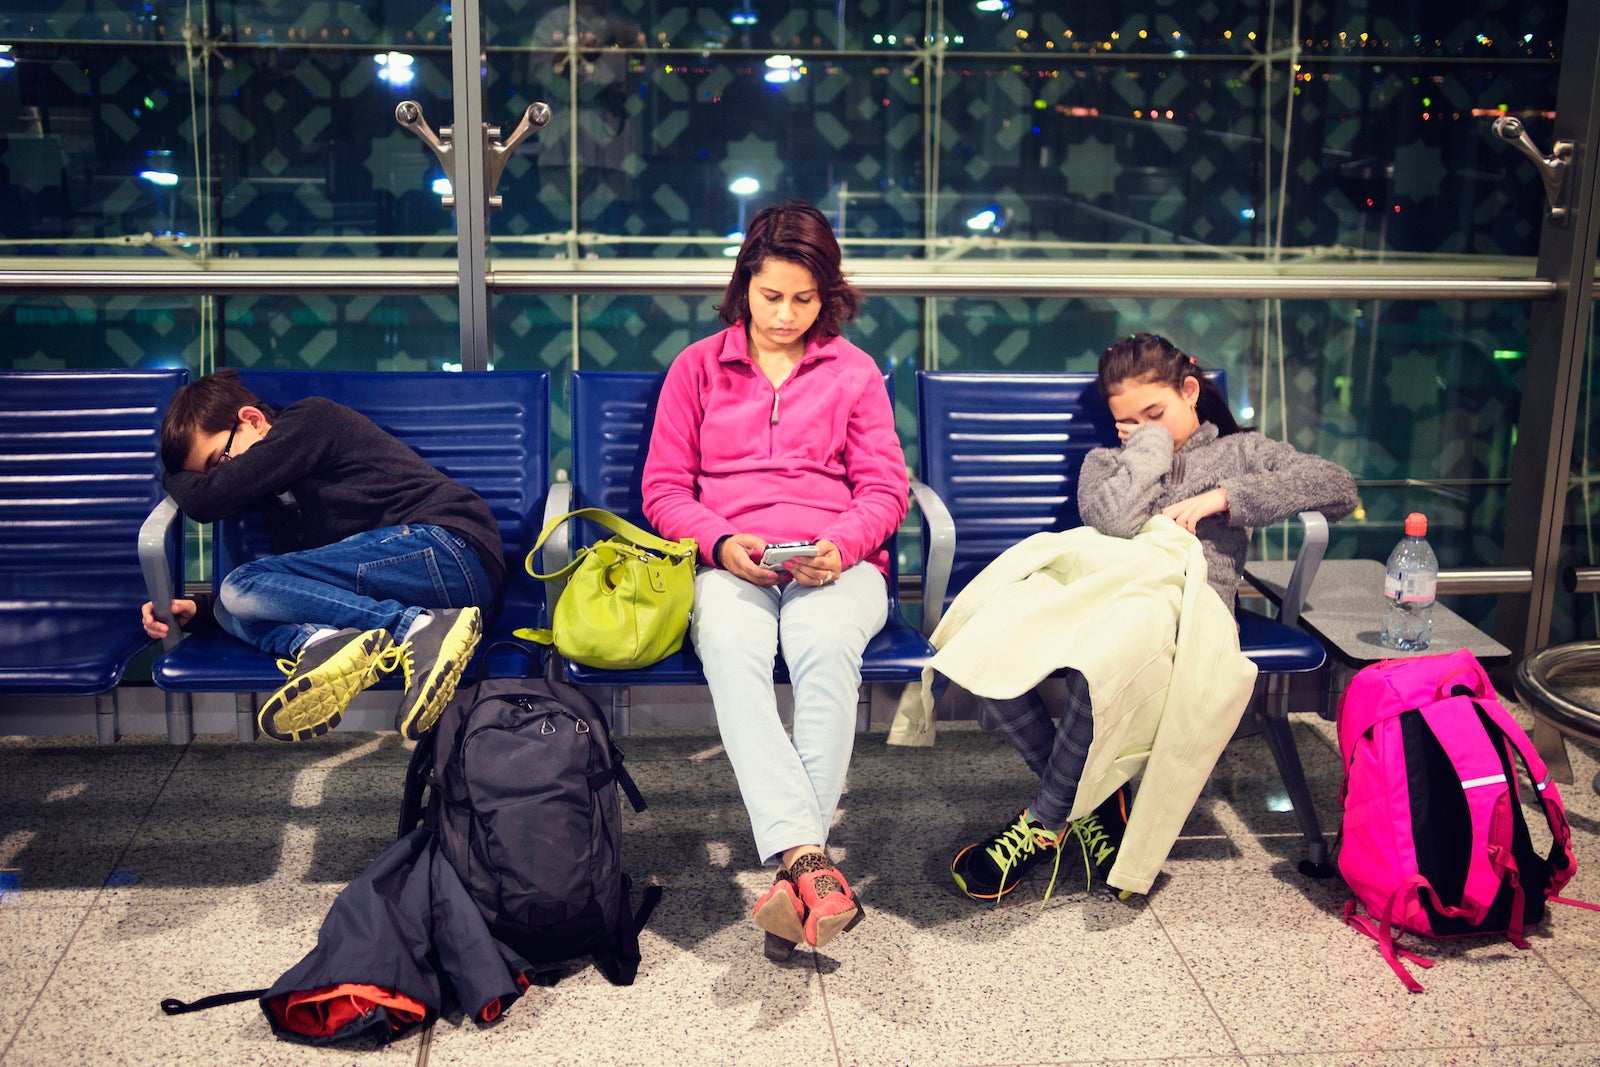 A family waits in an airport; the children are trying to sleep while the mom plays on her phone